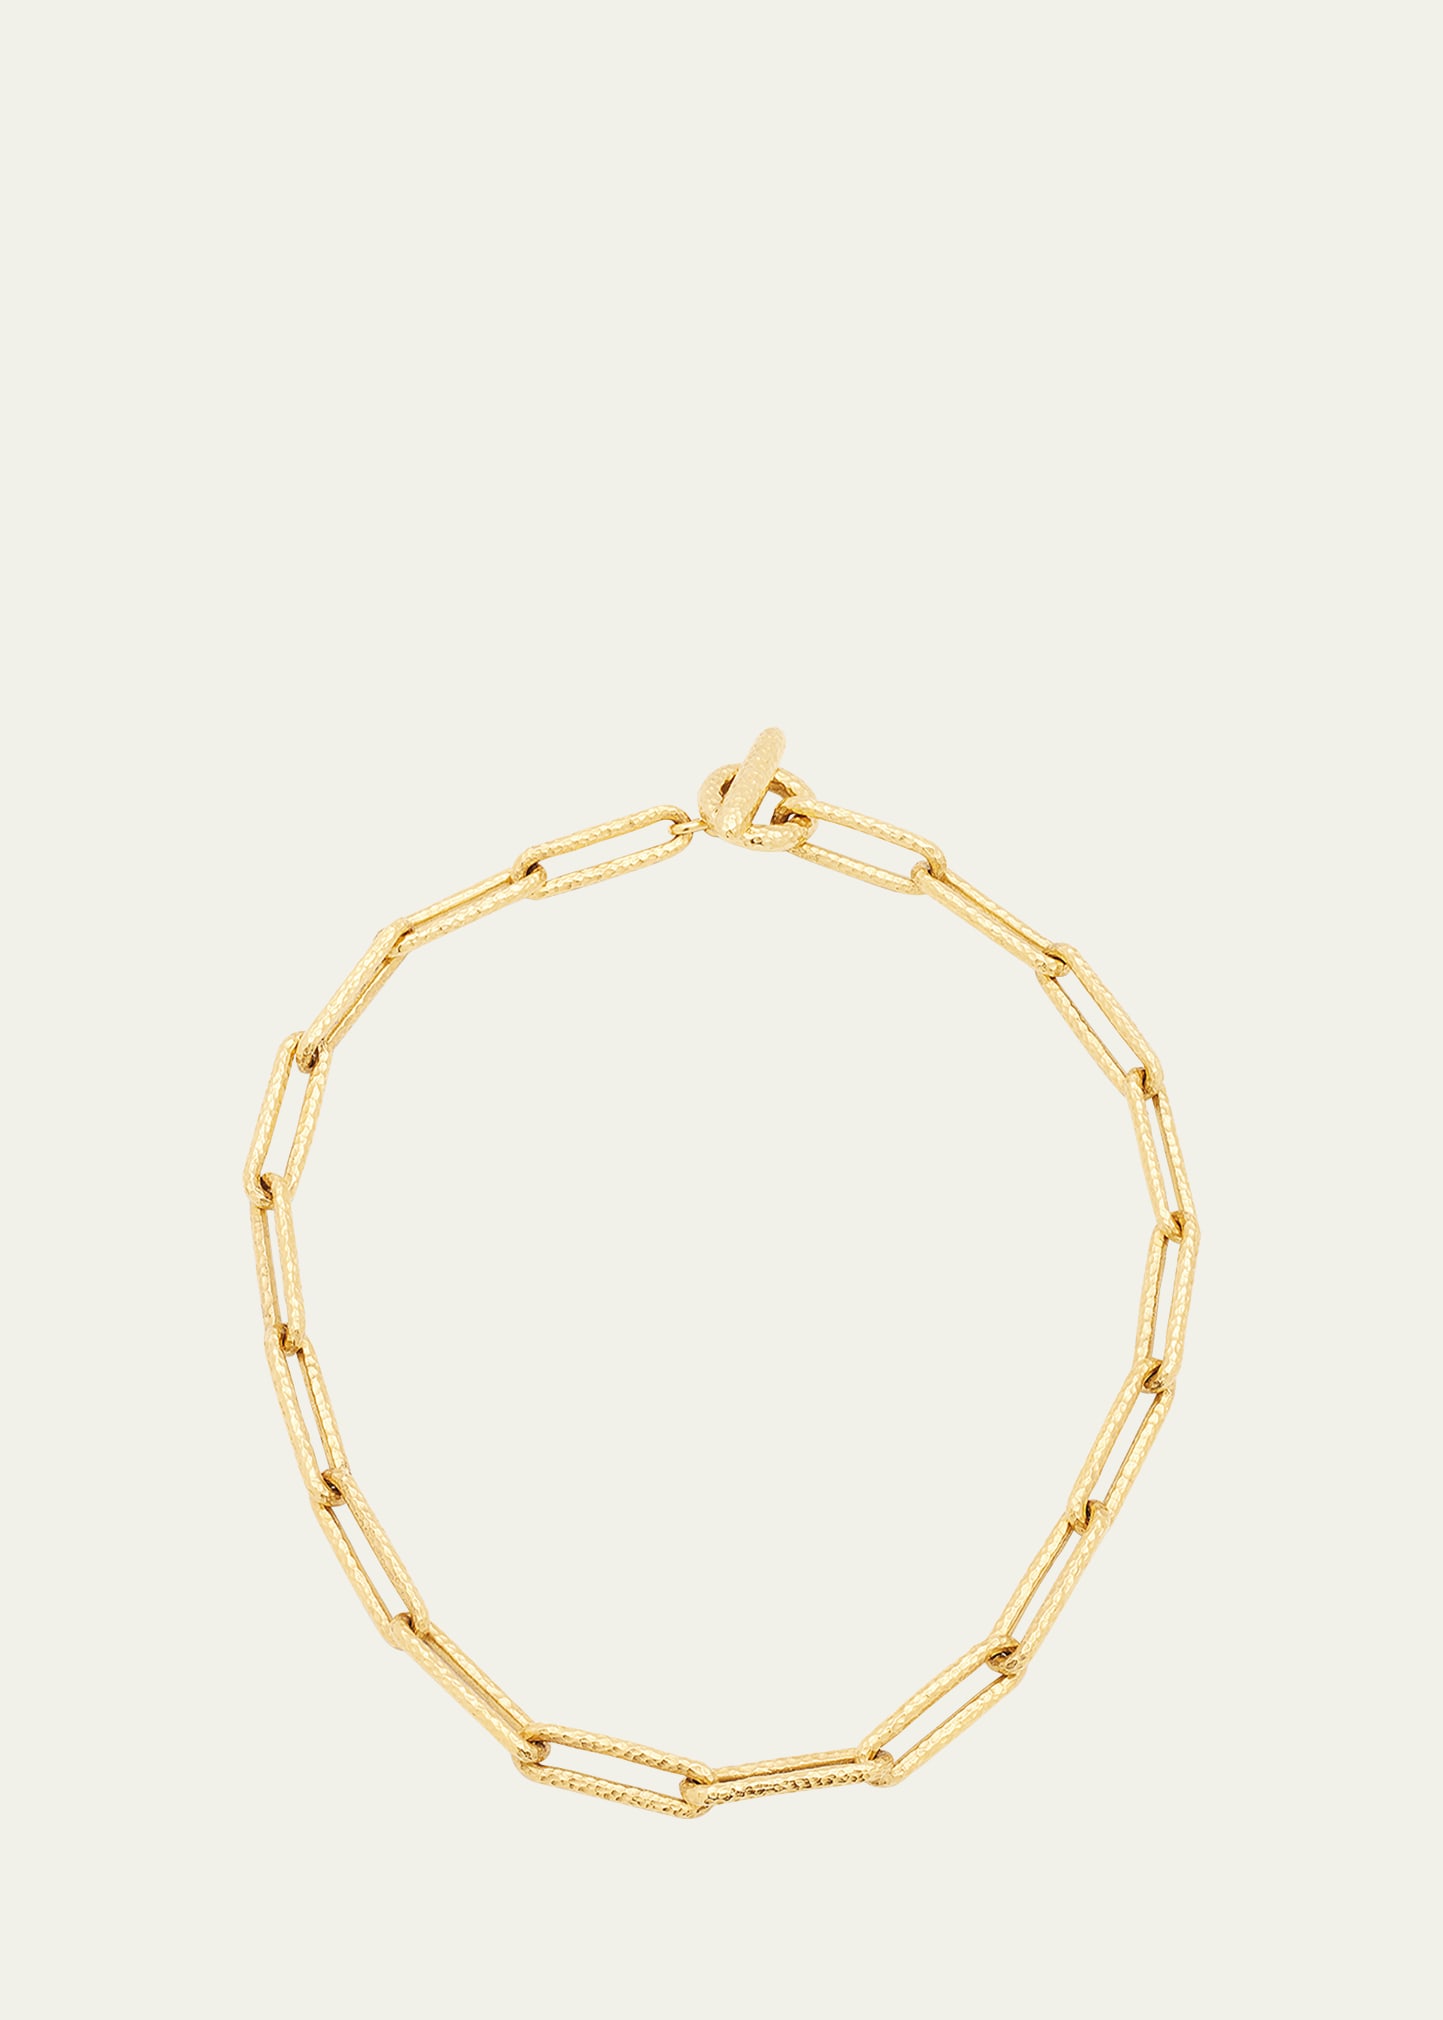 24K Hammered Yellow Gold Cable Chain Necklace